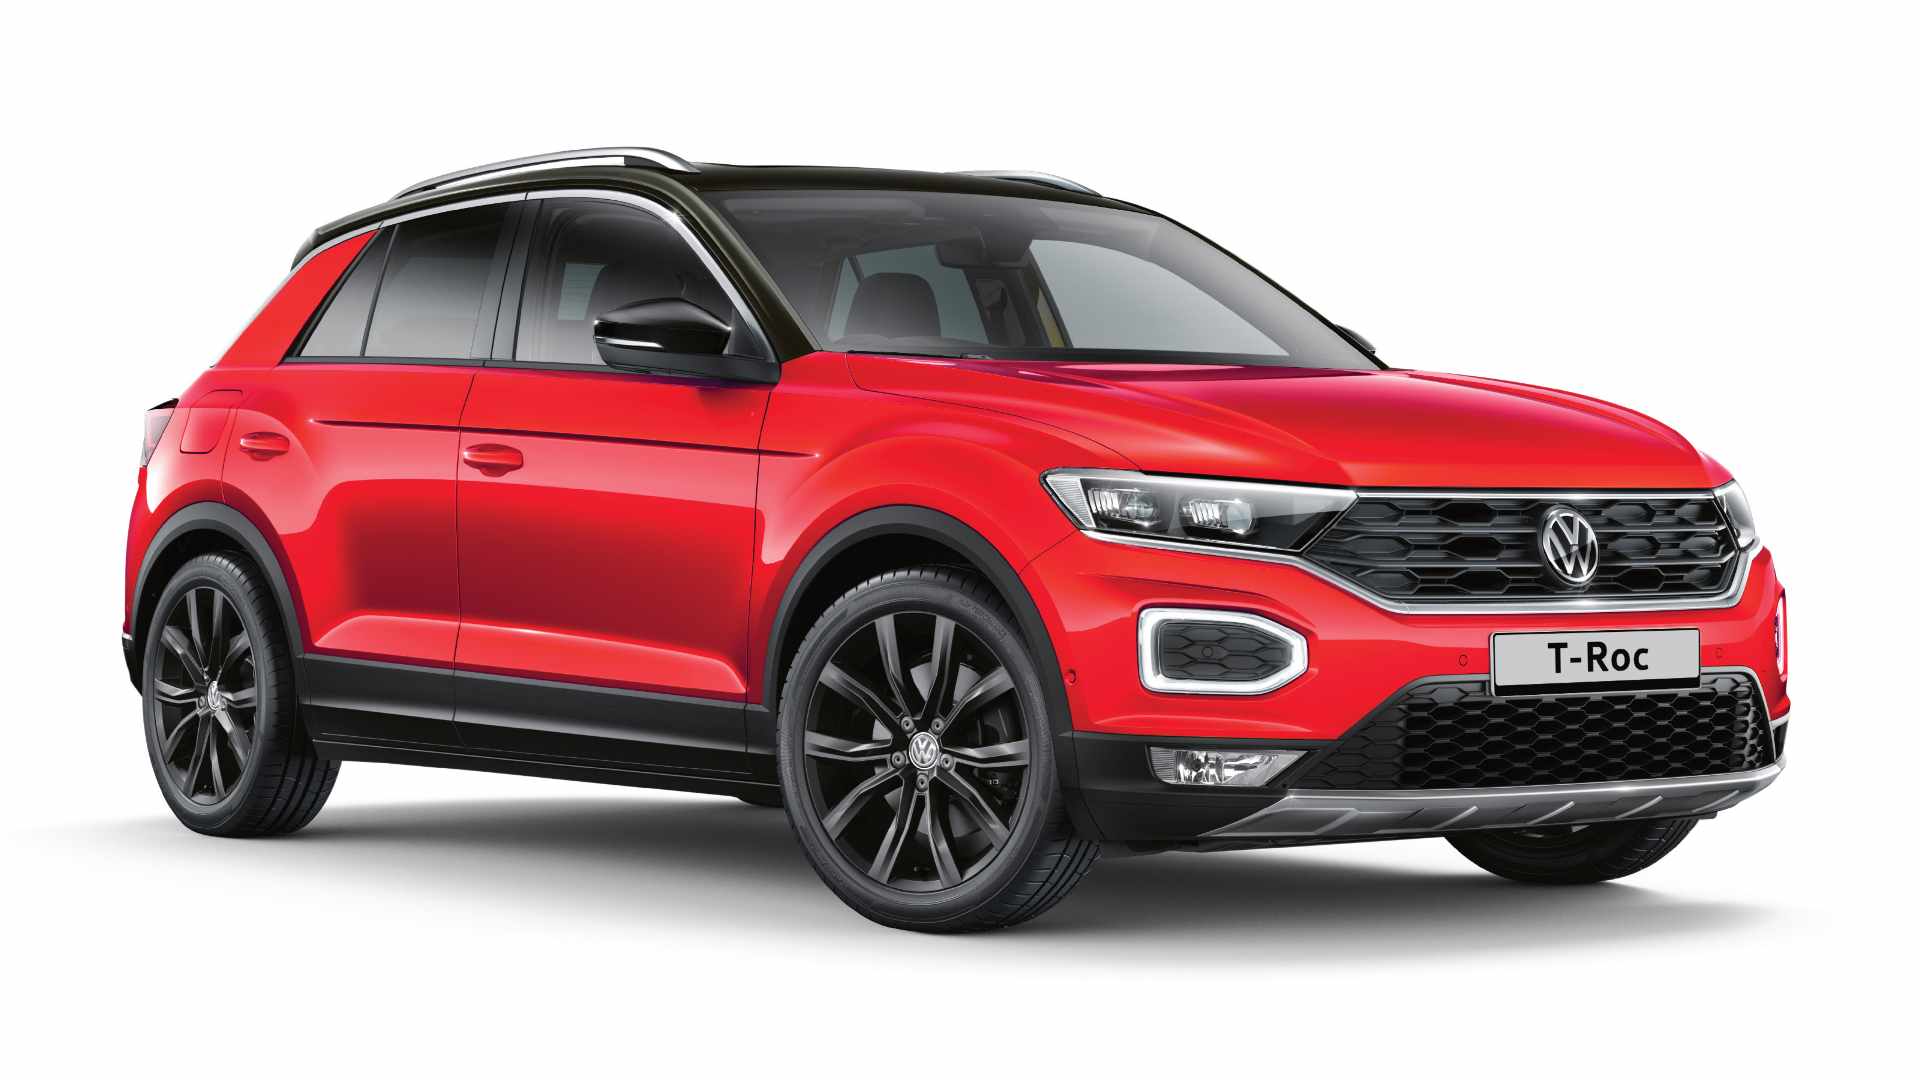  Volkswagen T-Roc SUV goes on sale in India once again, is now much more expensive